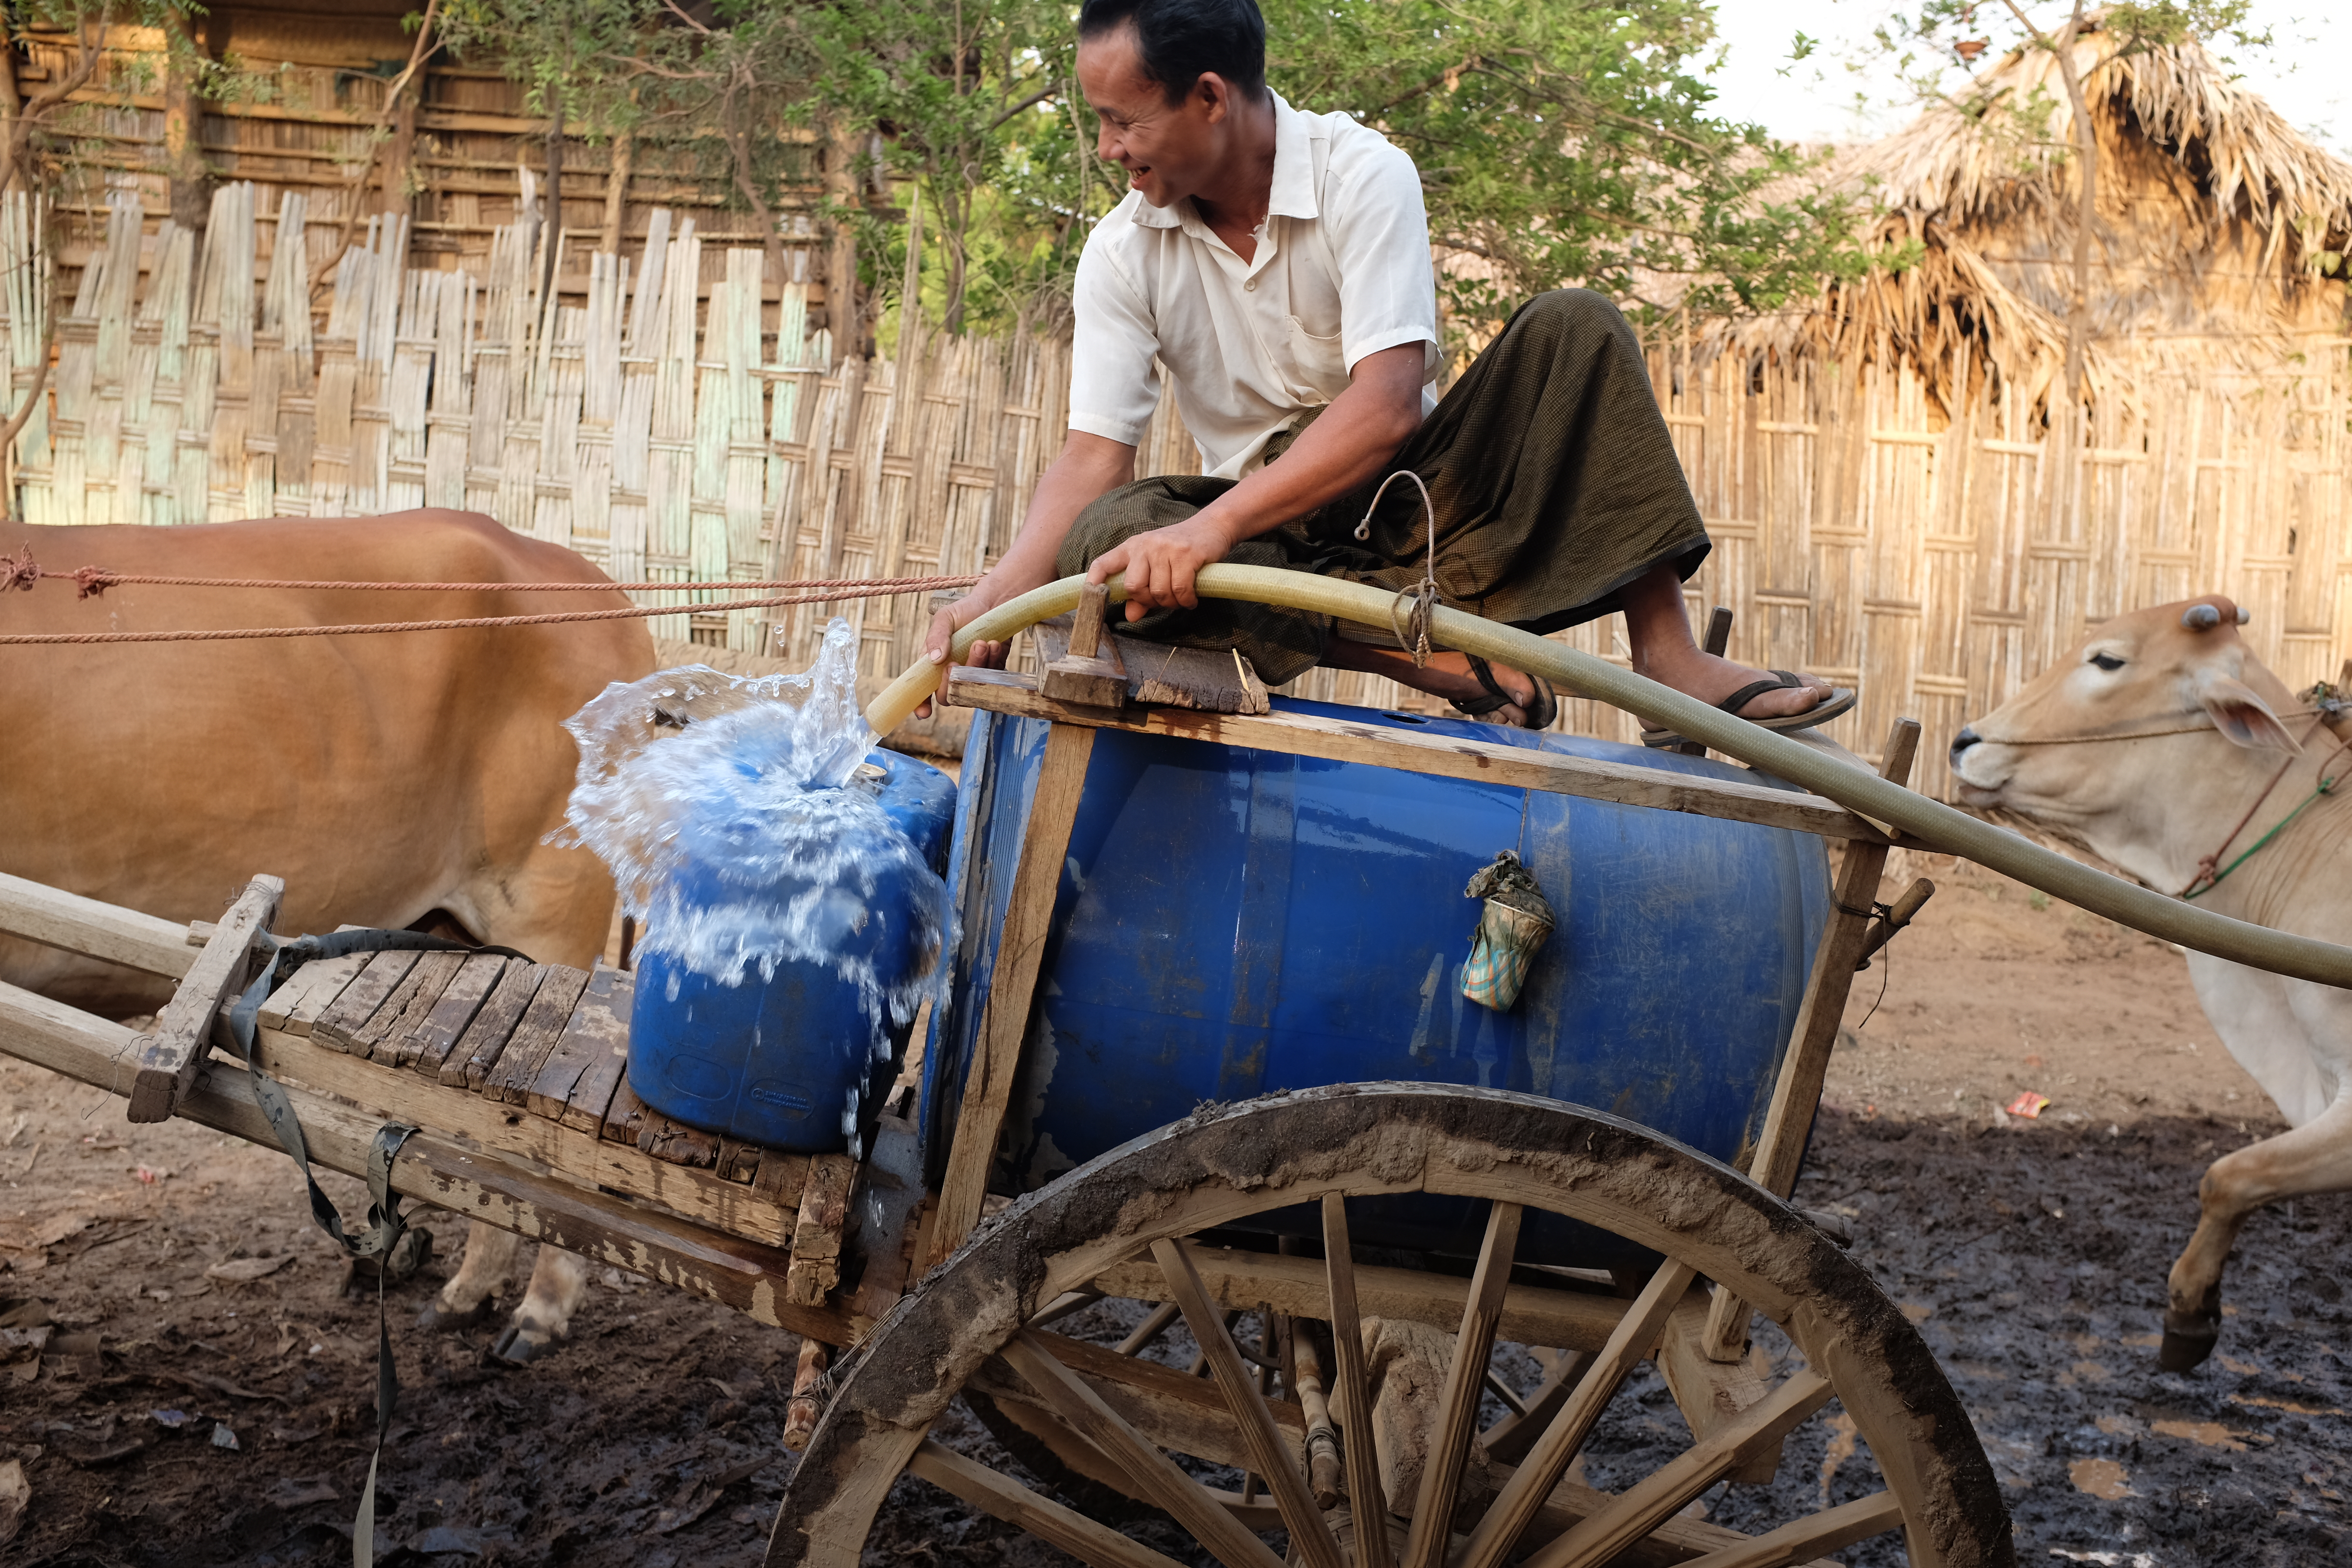 A man on cart uses a hose to fill blue water containers with cows standing by